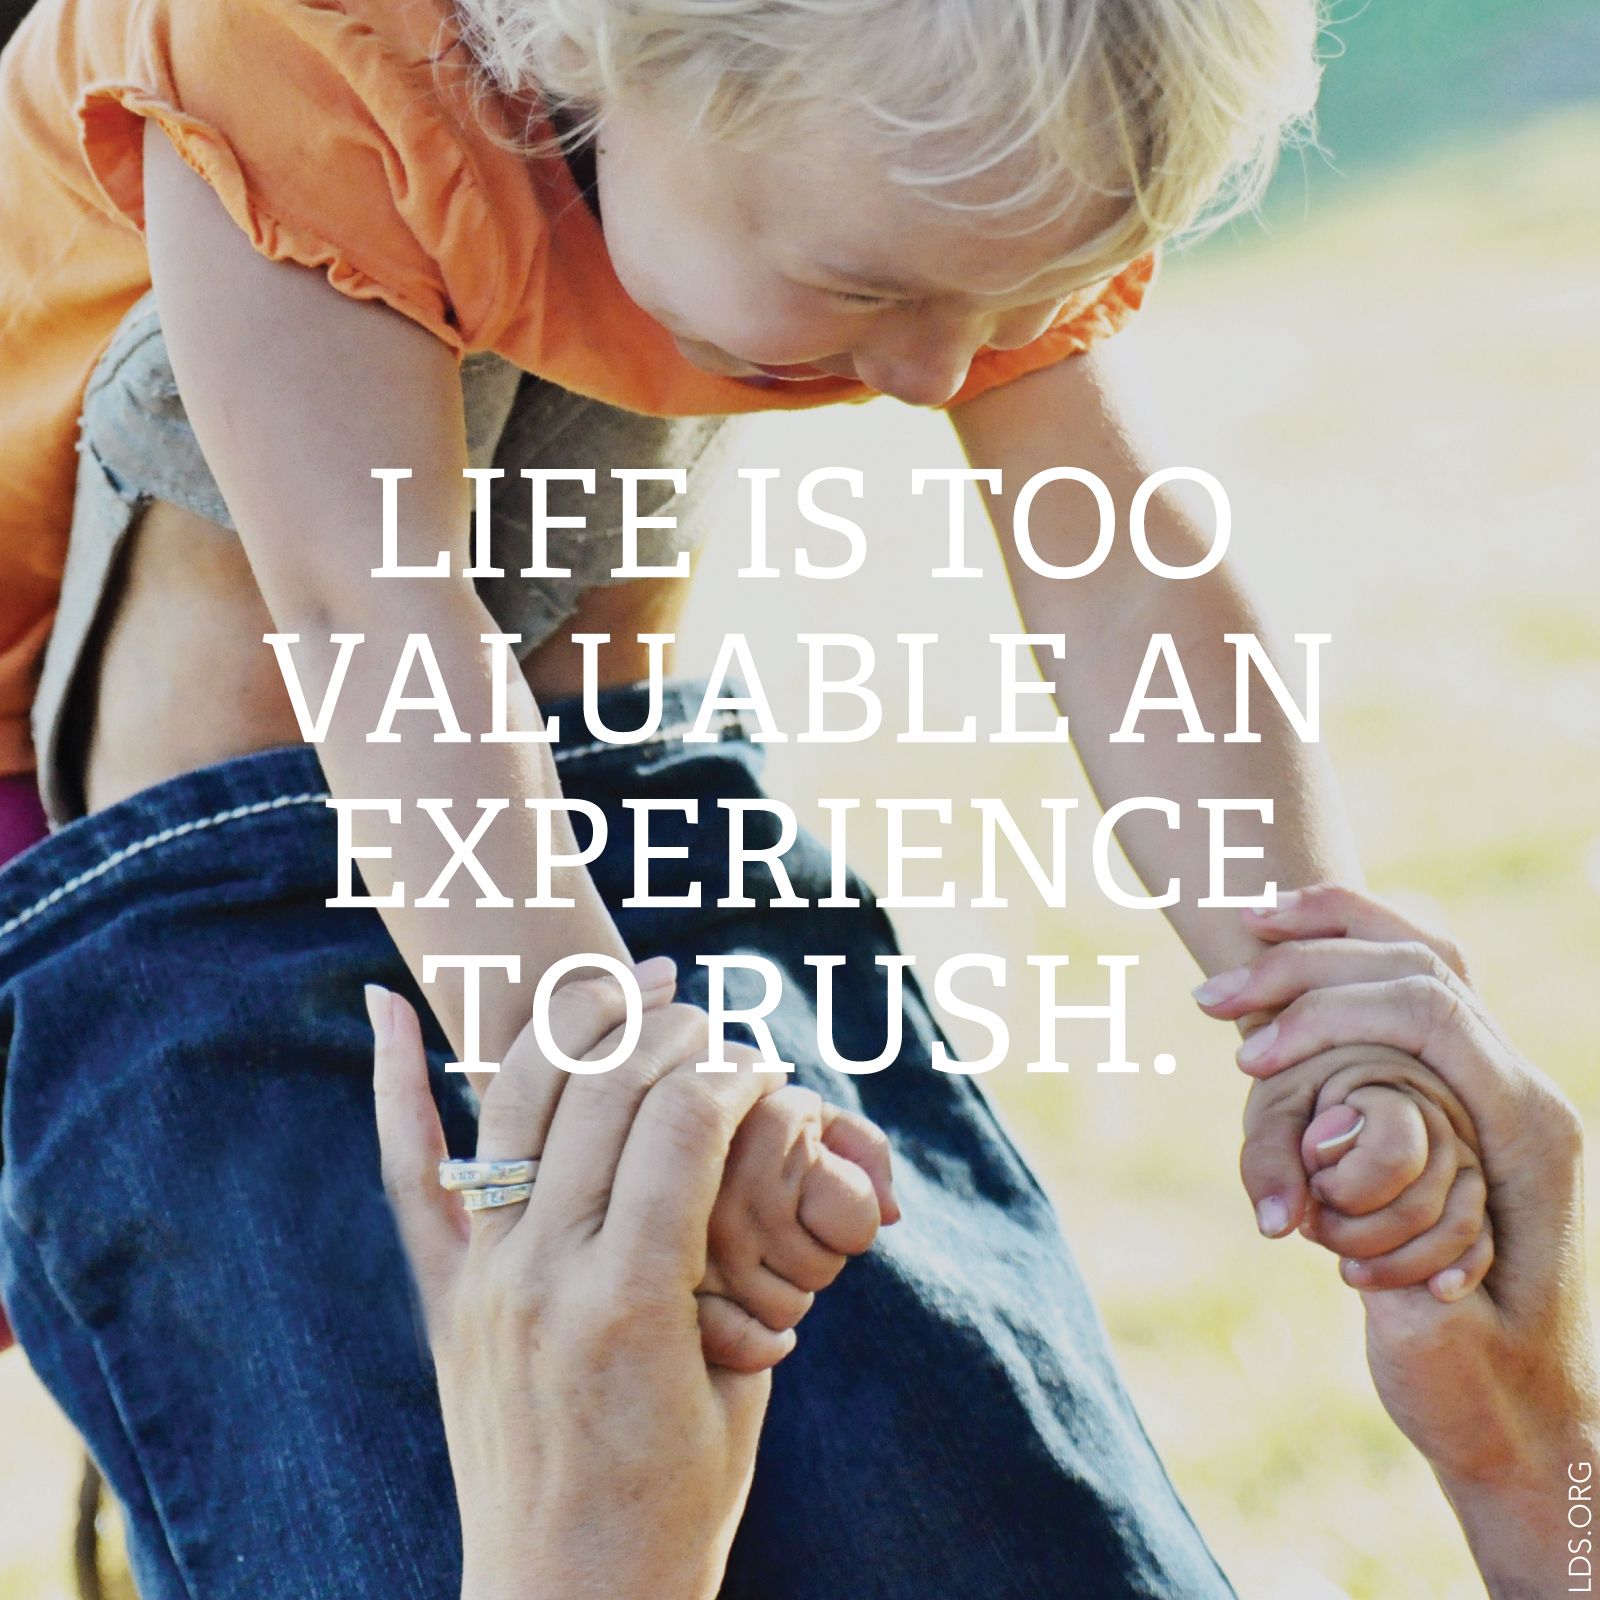 “Life is too valuable an experience to rush.”—“Run with Patience”